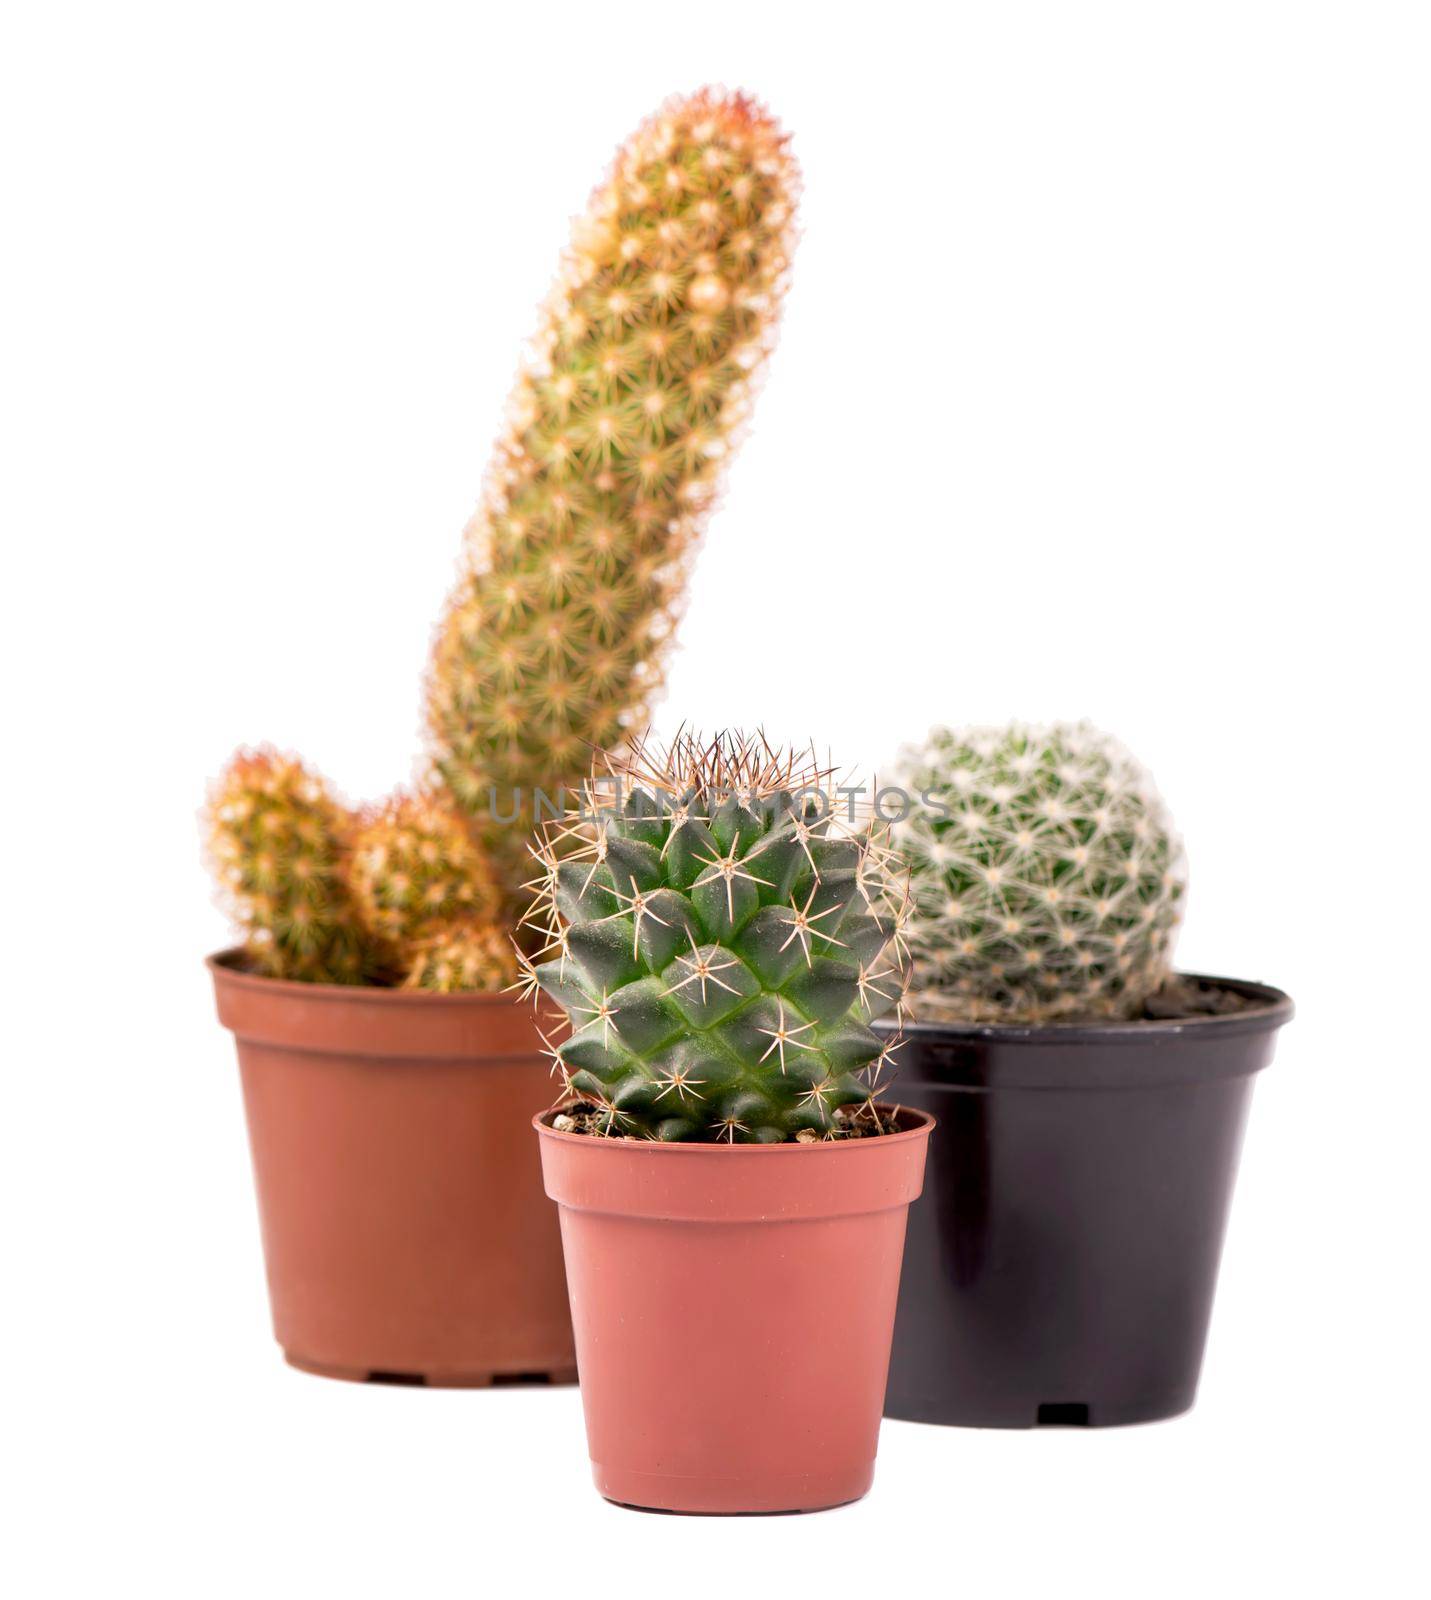 Three small cactuses isolated on white background by aprilphoto